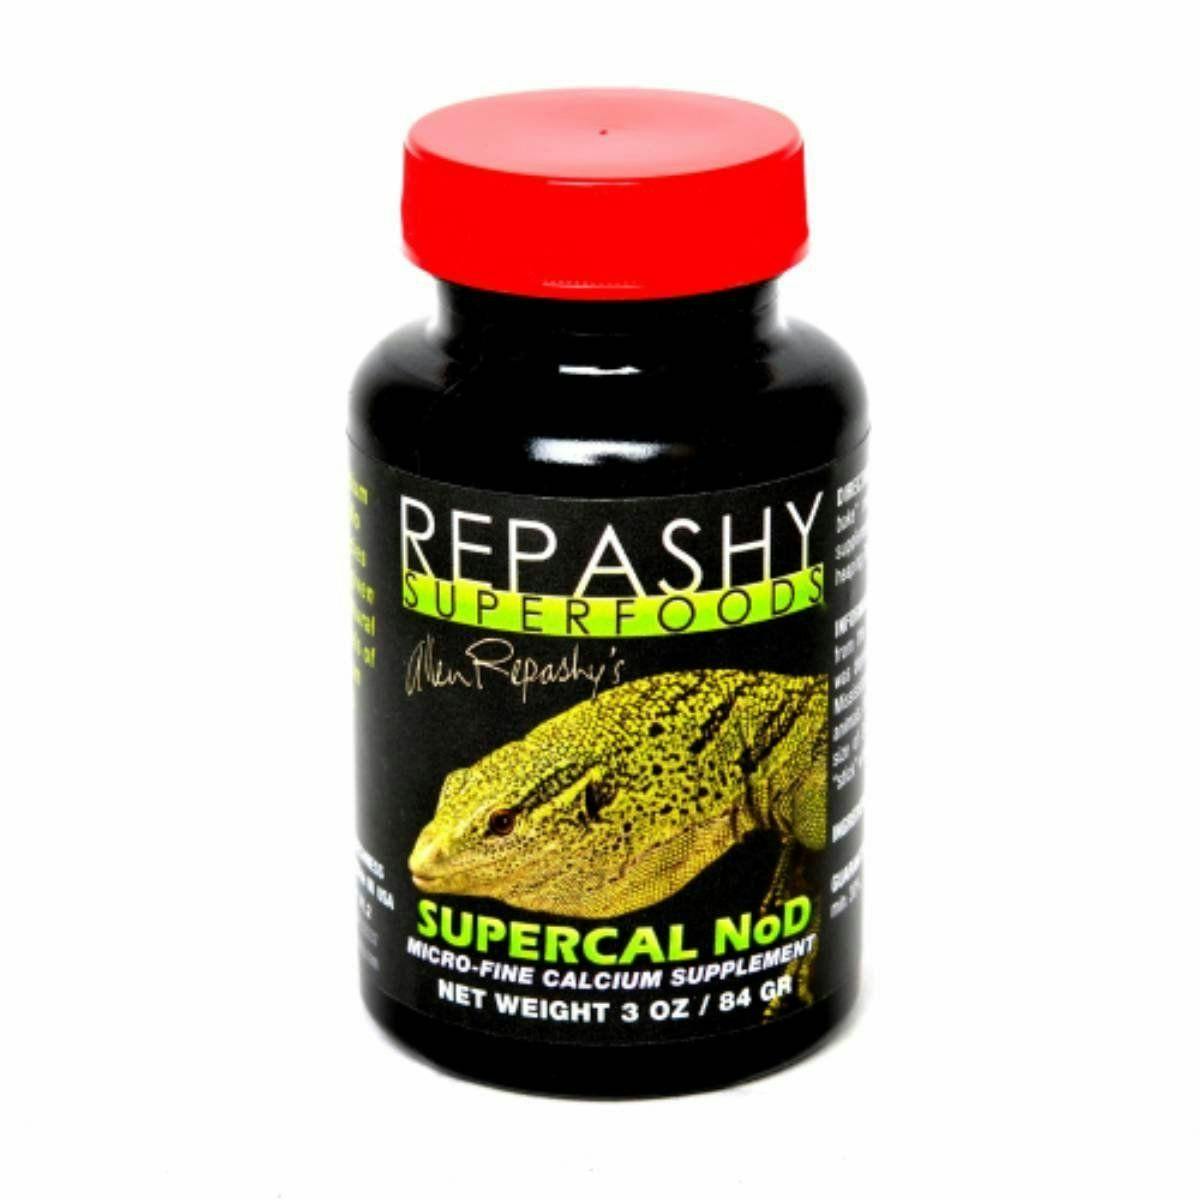 Image 1 for Repashy Supercal NoD (3 oz Jar) by Josh's Frogs